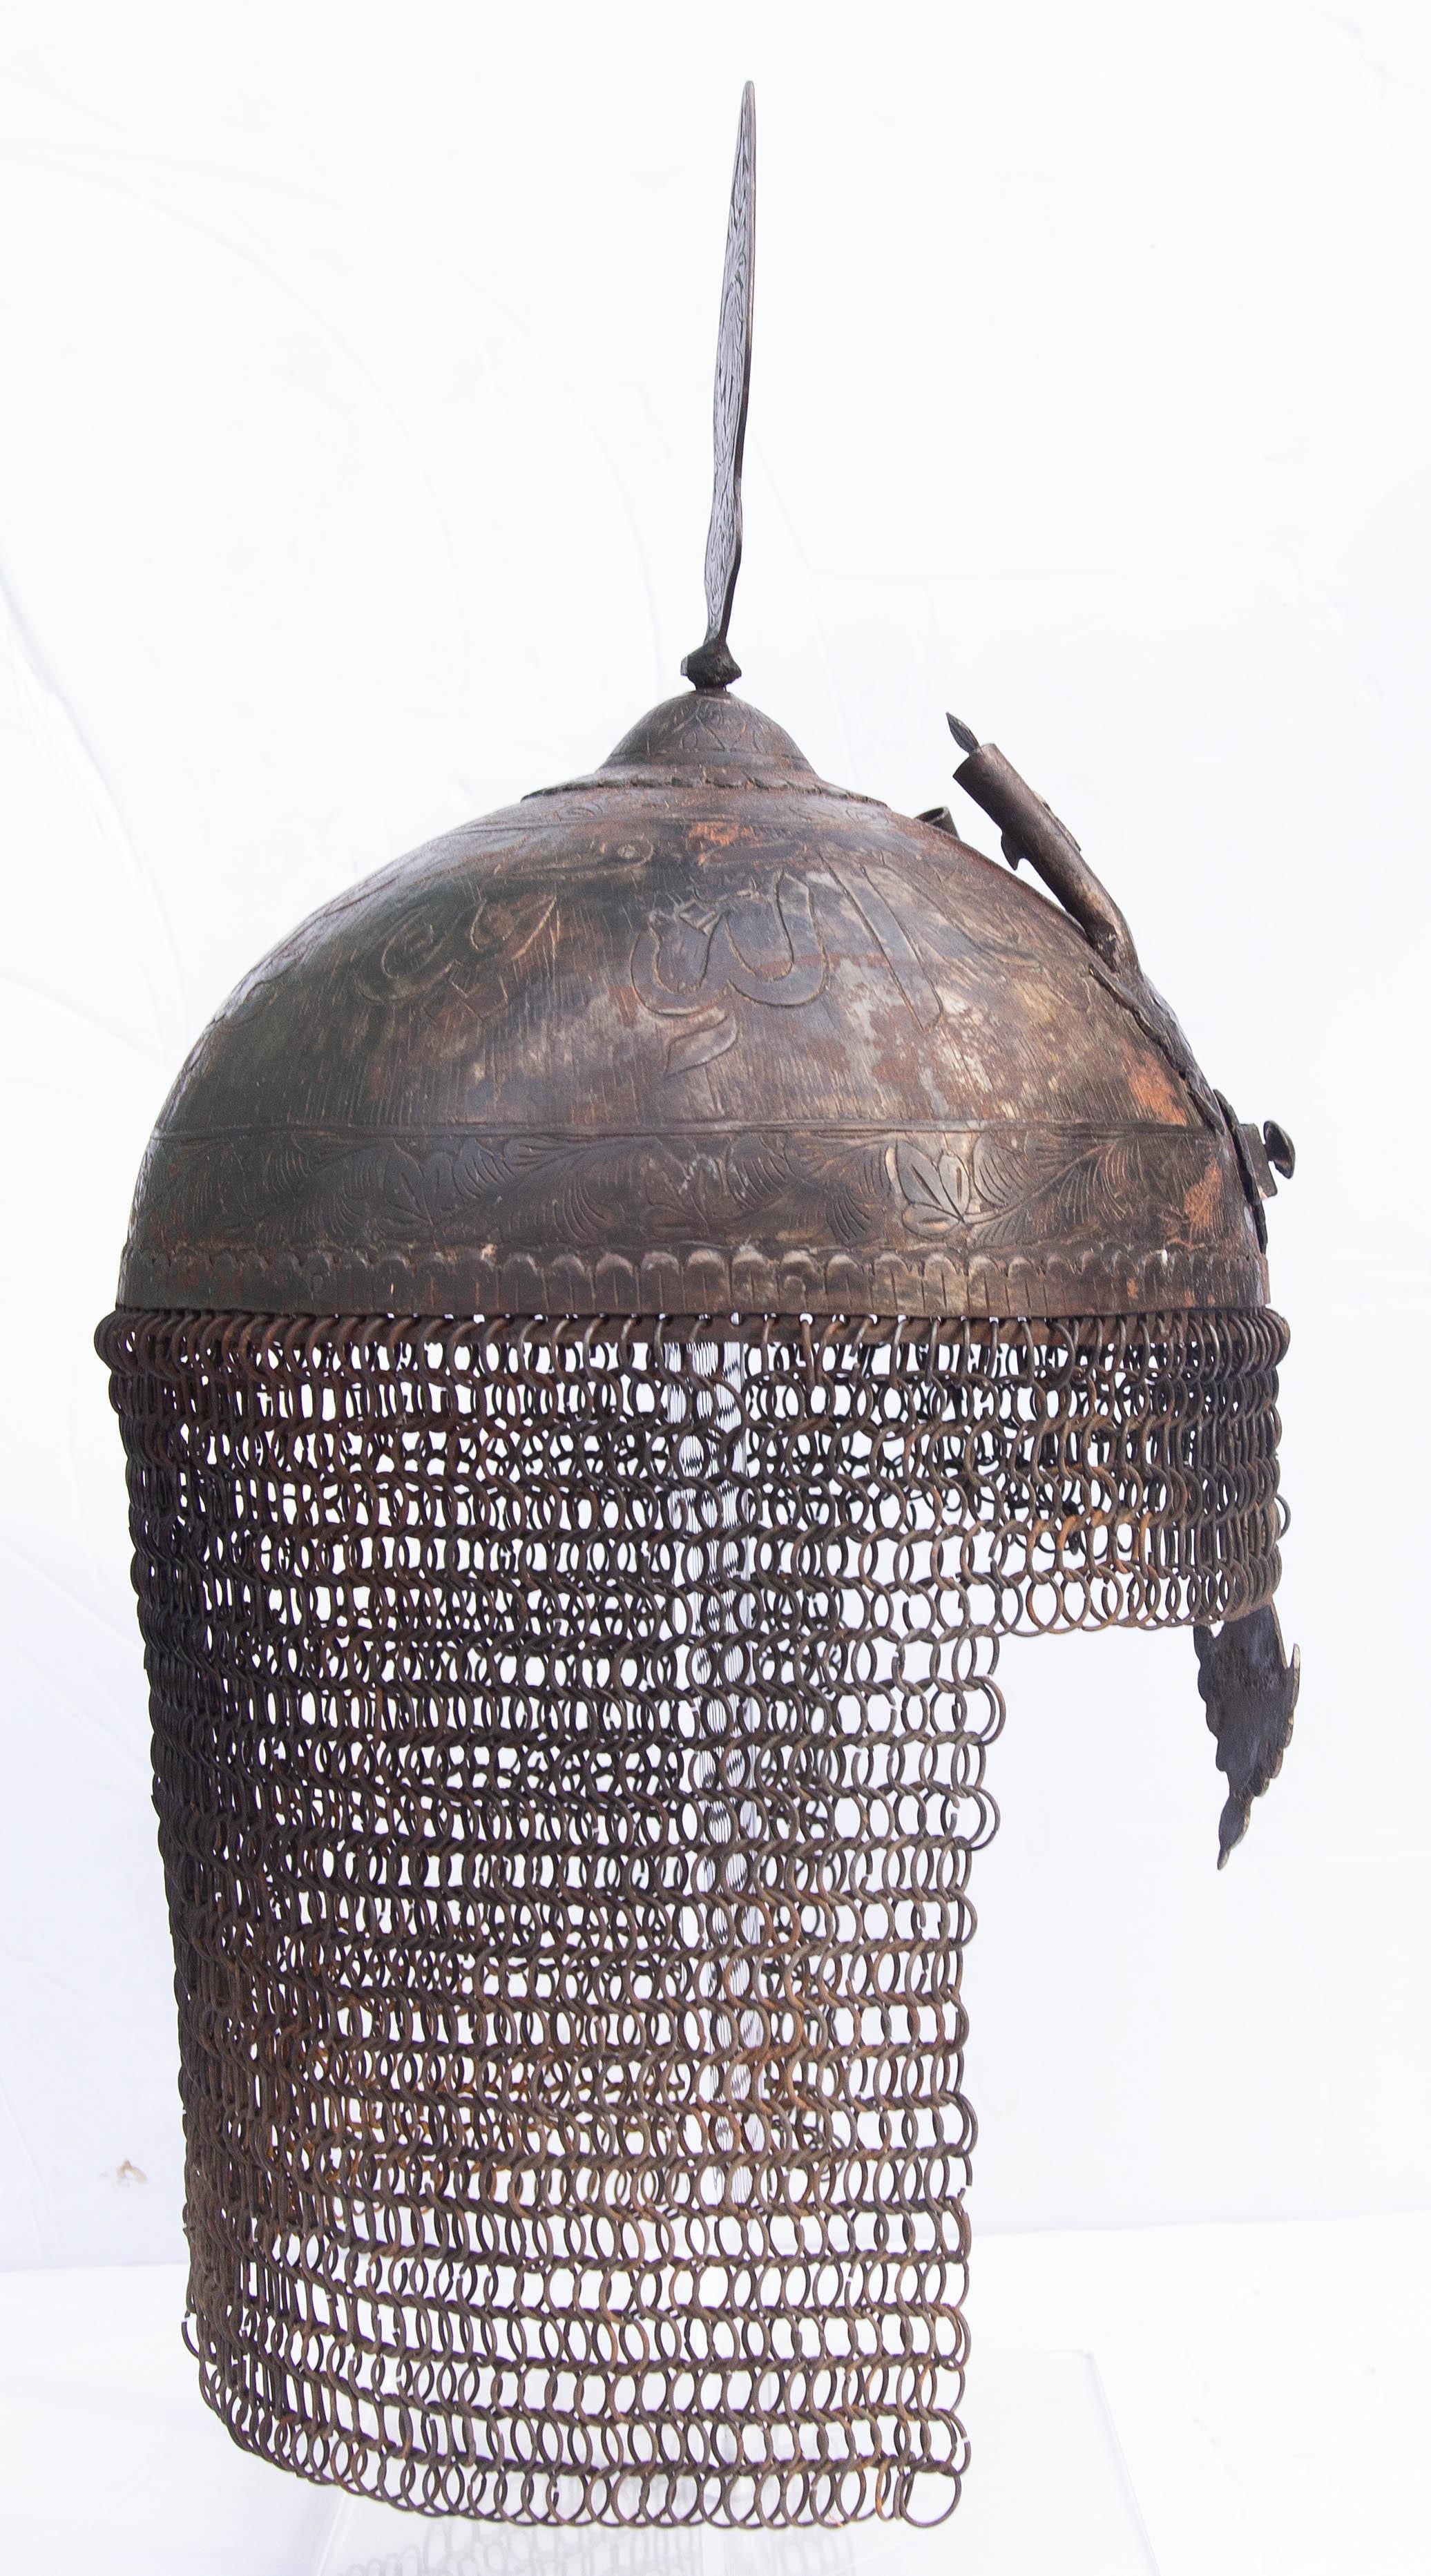 Islamic Persian iron helmet with chainmail. Engraved with Arabic symbols. Early 20th century. Lucite display stand is included.